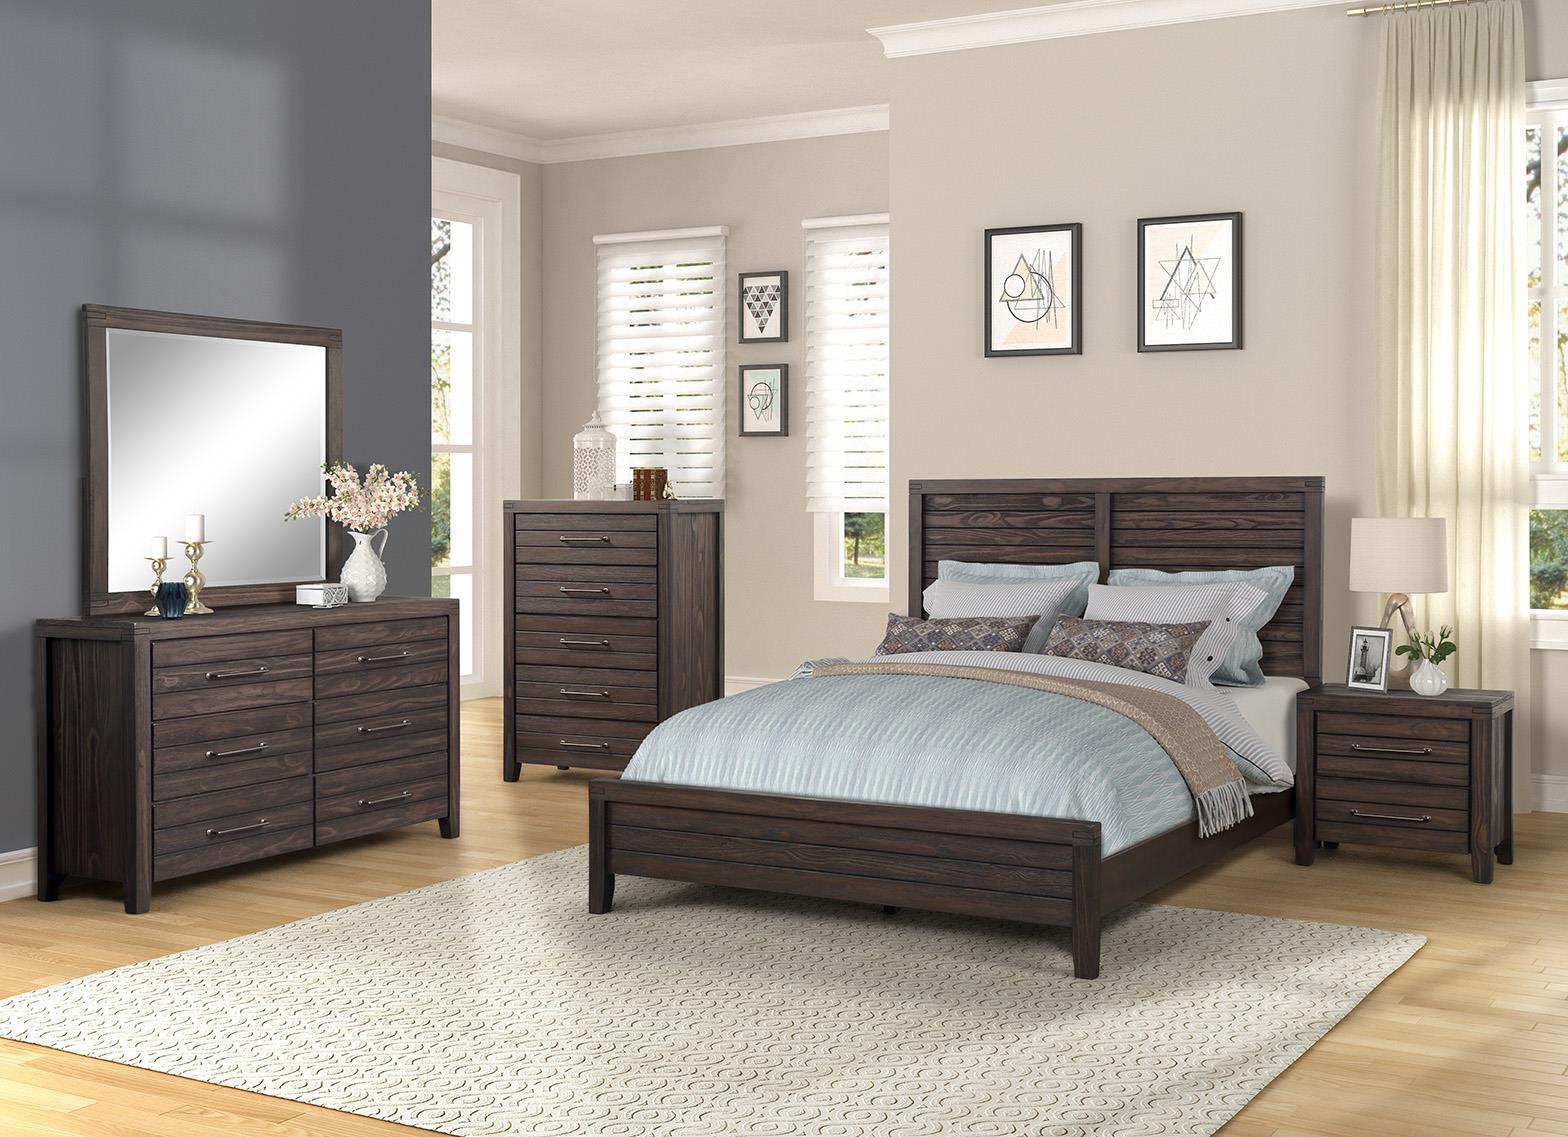 Contemporary, Traditional Panel Bedroom Set CRESTWOOD 1465-110-Set 1465-110-2NDM-5PC in Auburn, Brown 